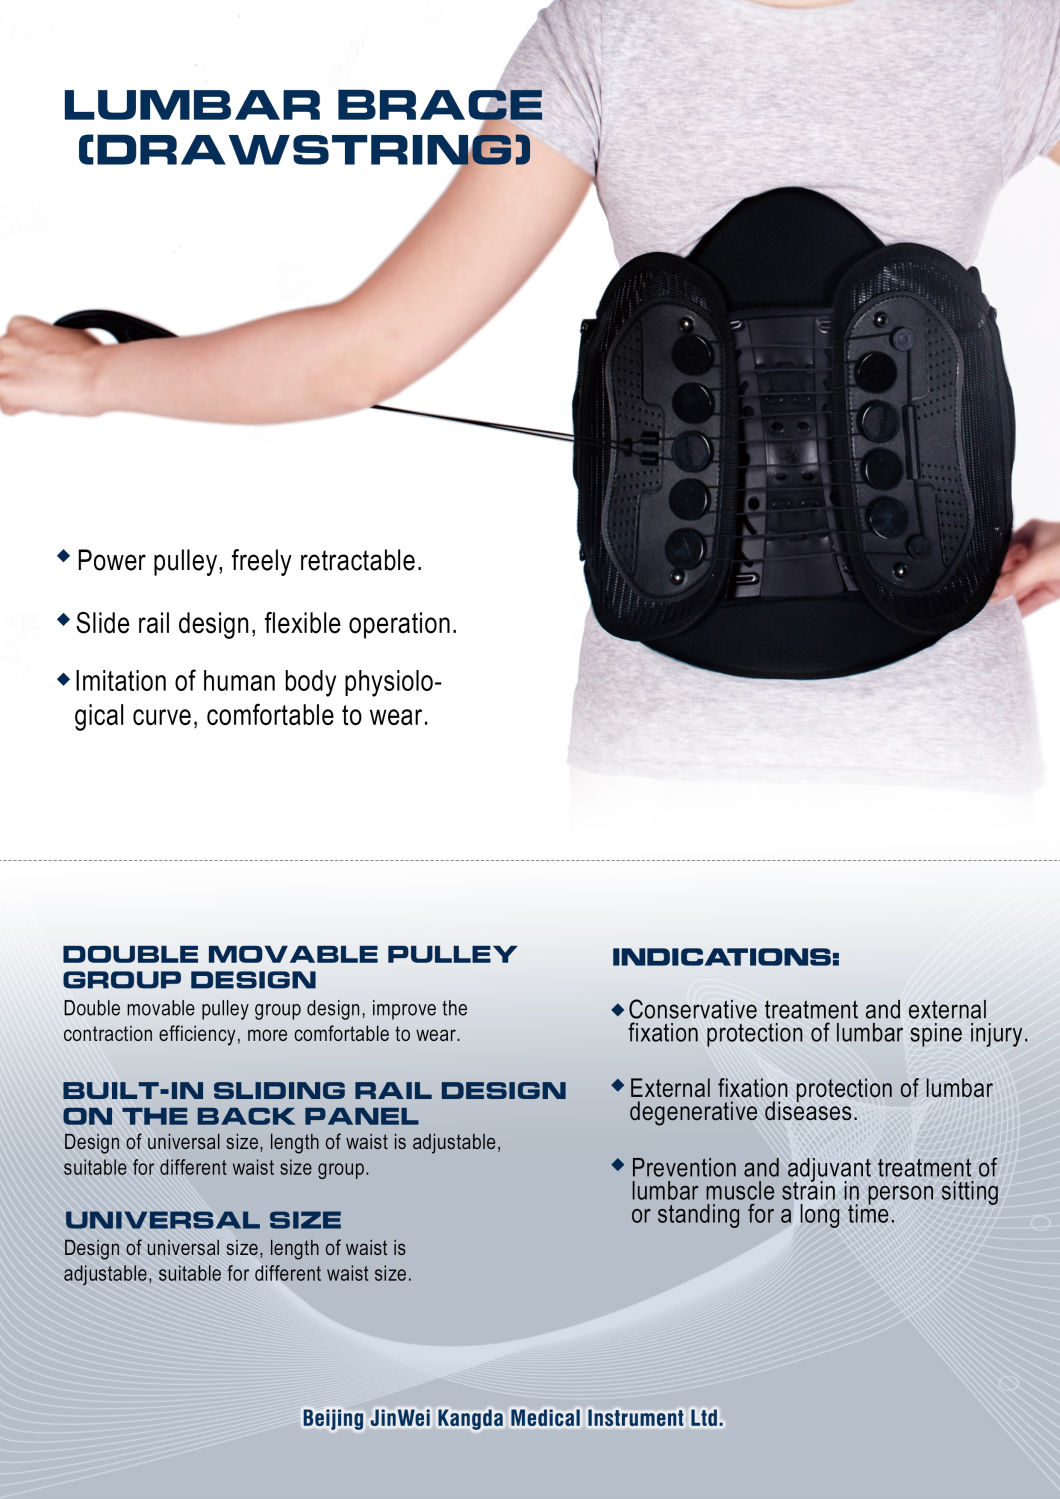 Adjustable Lumbar Lower Back Support Brace - Herniated or Bulging Disc, Sciatica, Scoliosis, Ddd - Men and Women